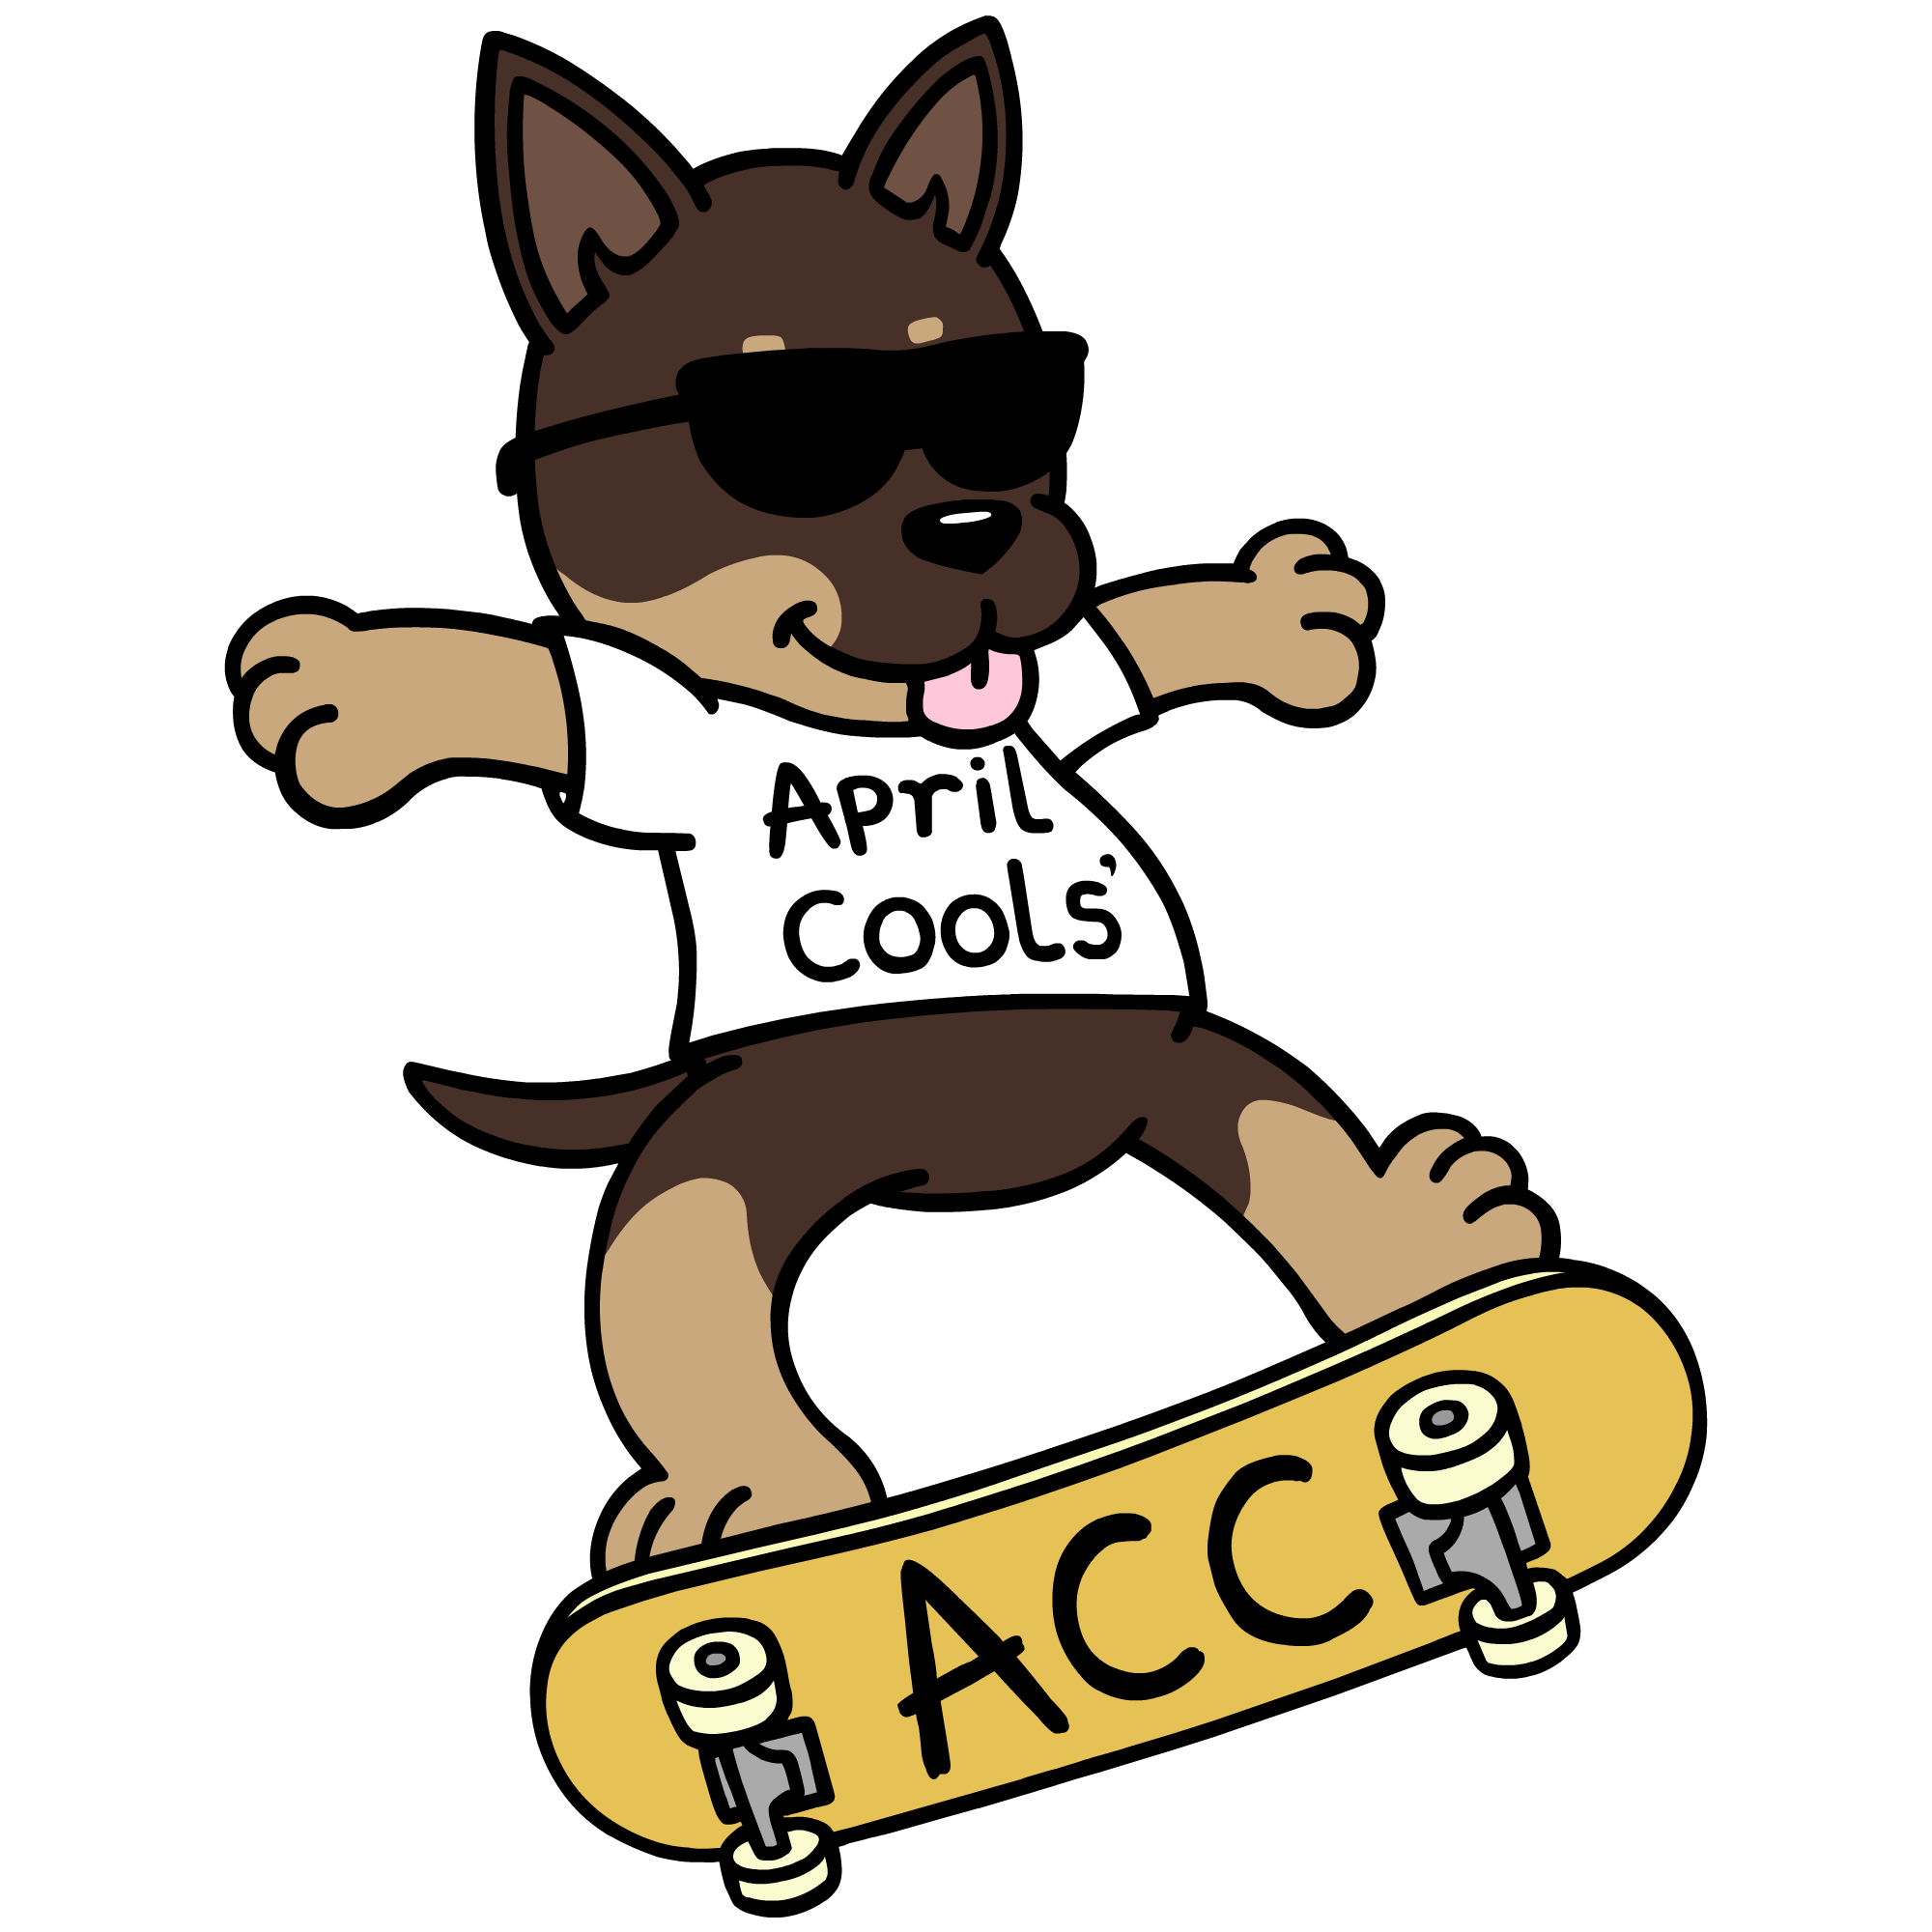 A cartoon-style drawing of a shepherd dog on a skateboard, wearing sunglasses and a white shirt saying “April Cools'”